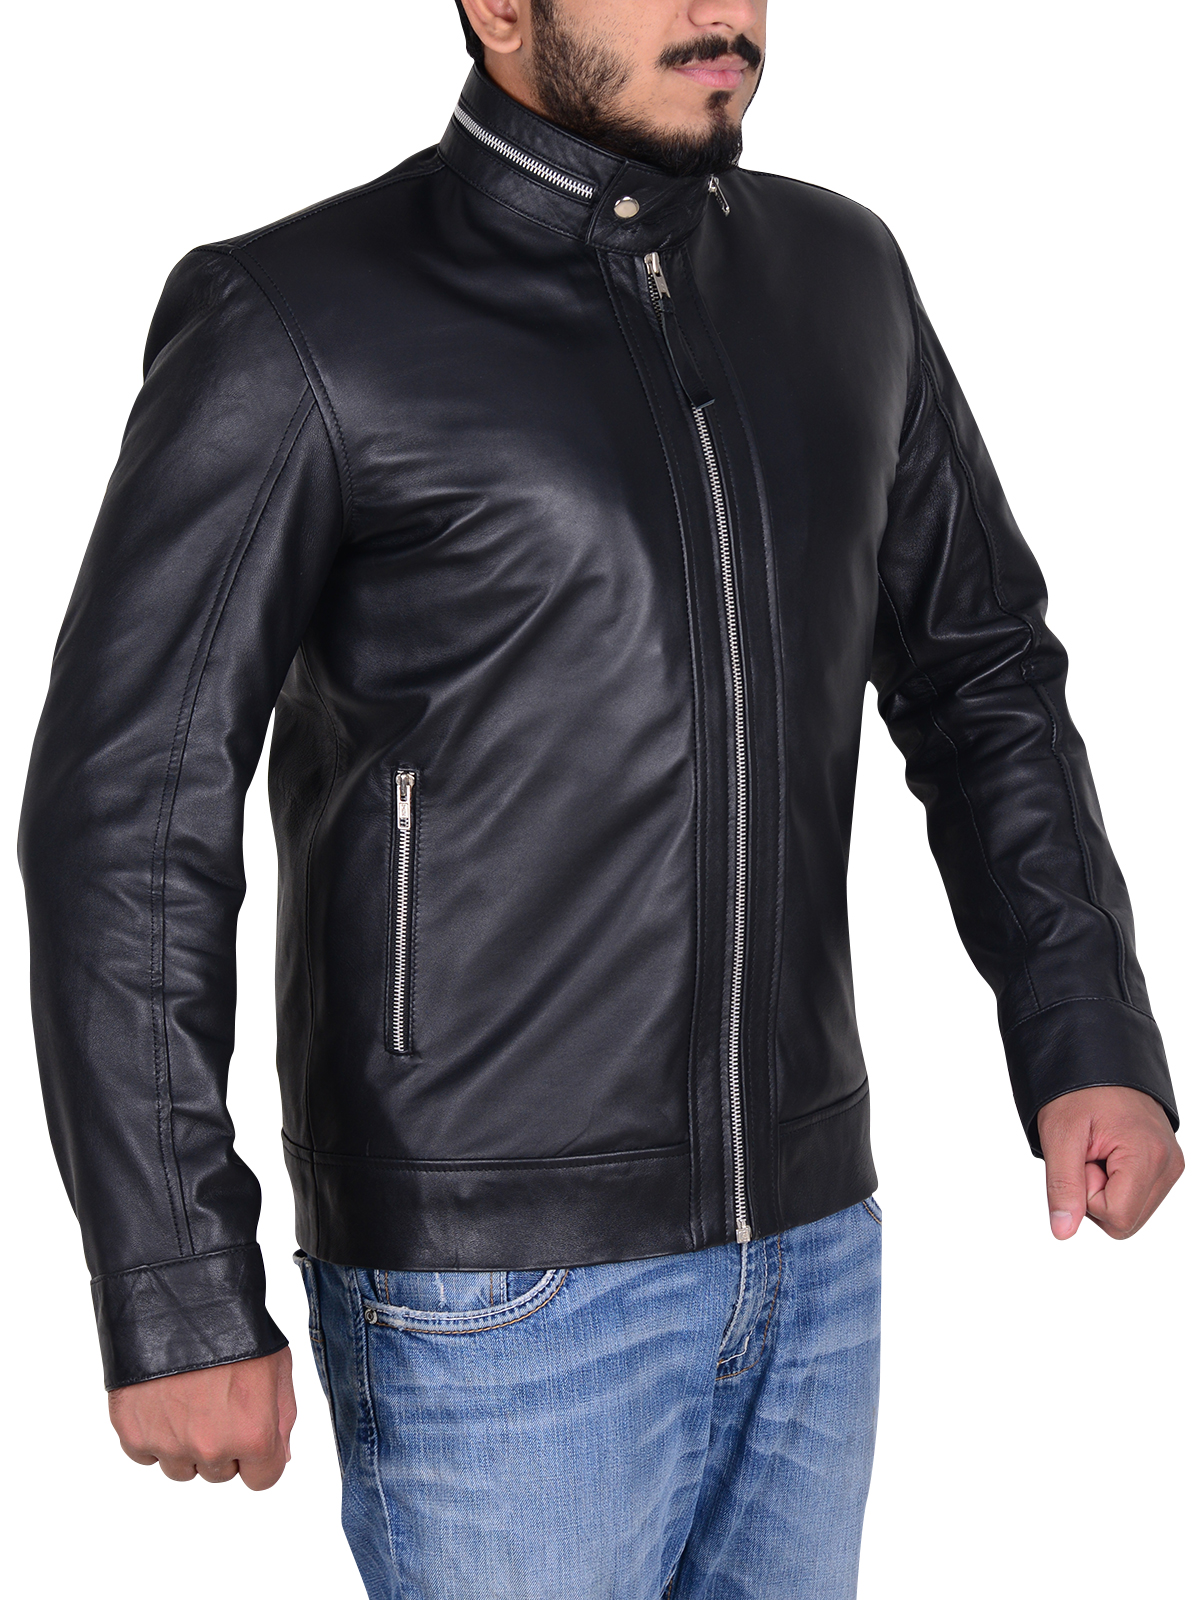 JUSTIN HARTLEY THIS IS US LEATHER JACKET